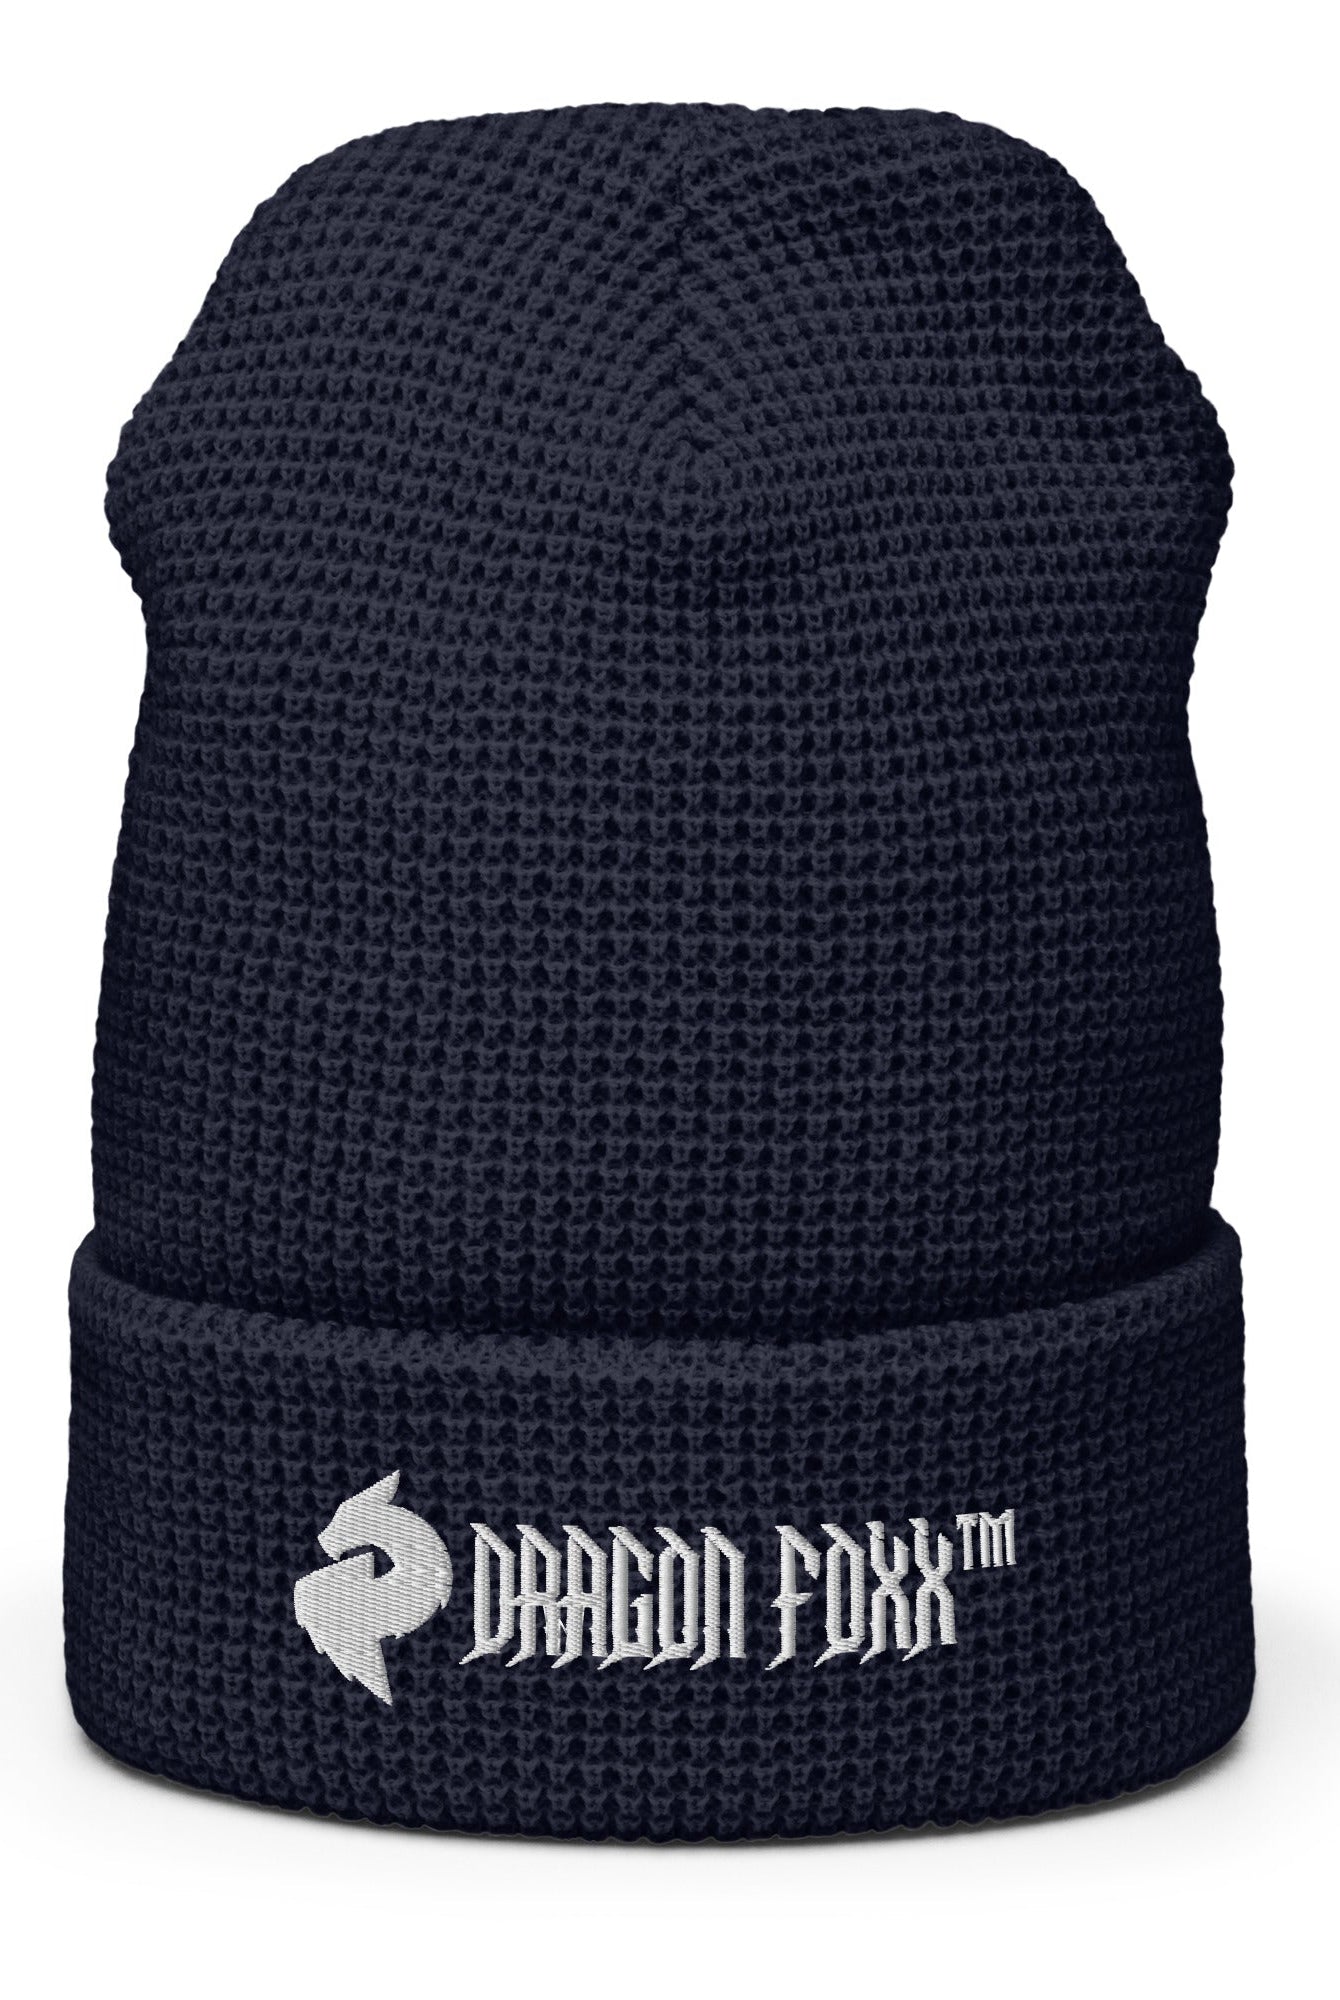 His or Hers Dragon Foxx™ Waffle beanie in 7 Colors - His or Hers Dragon Foxx™ Waffle beanie - DRAGON FOXX™ - His or Hers Dragon Foxx™ Waffle beanie in 7 Colors - 3986040_16175 - Navy - - Accessories - Beanie - Beanies